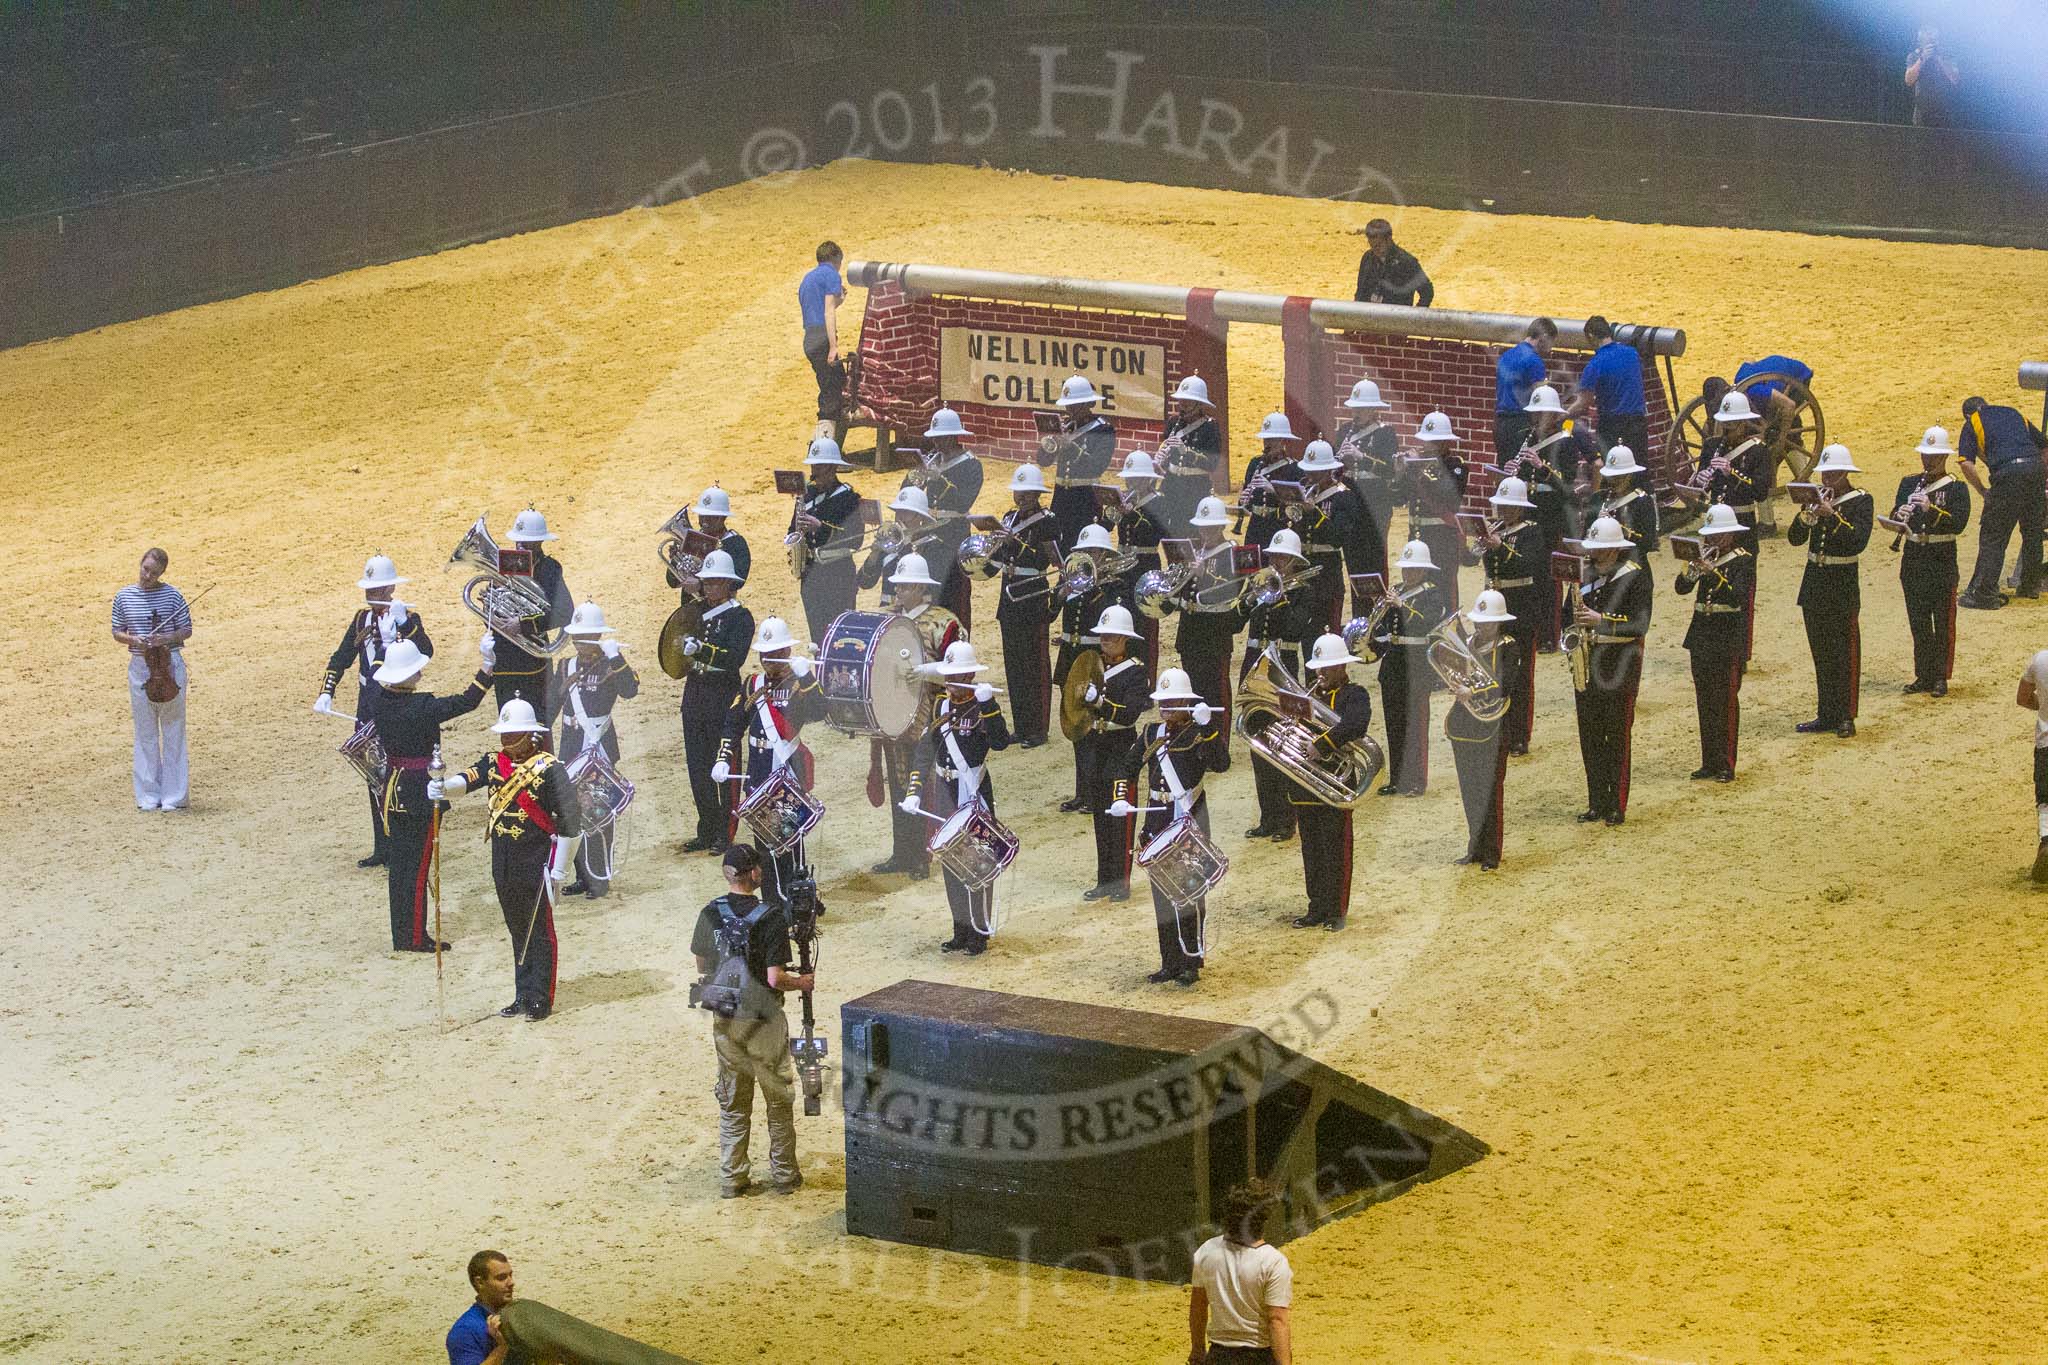 British Military Tournament 2013.
Earls Court,
London SW5,

United Kingdom,
on 06 December 2013 at 16:13, image #342